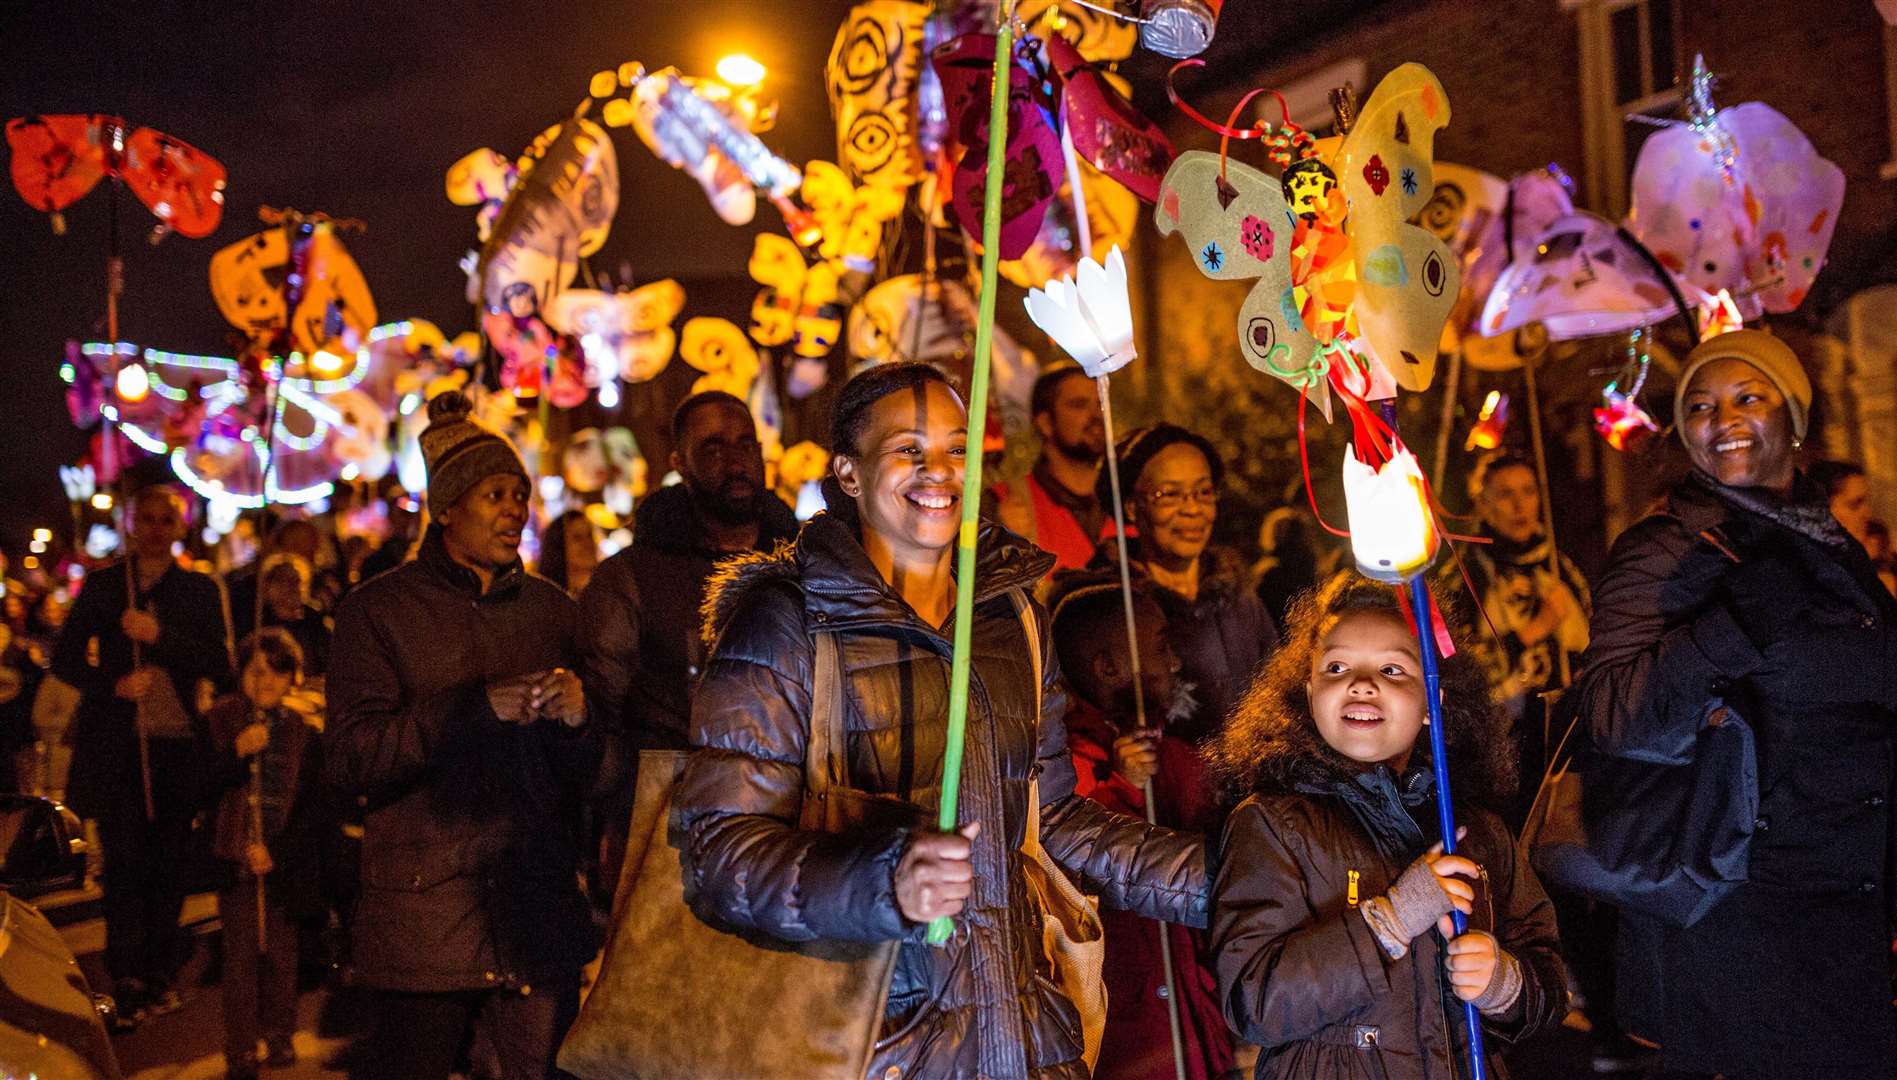 Starting at Elwick Place, a procession of giant illuminated baubles decorated by children from local primary schools across Ashford will make its way up Bank Street and through the Lower High Street.